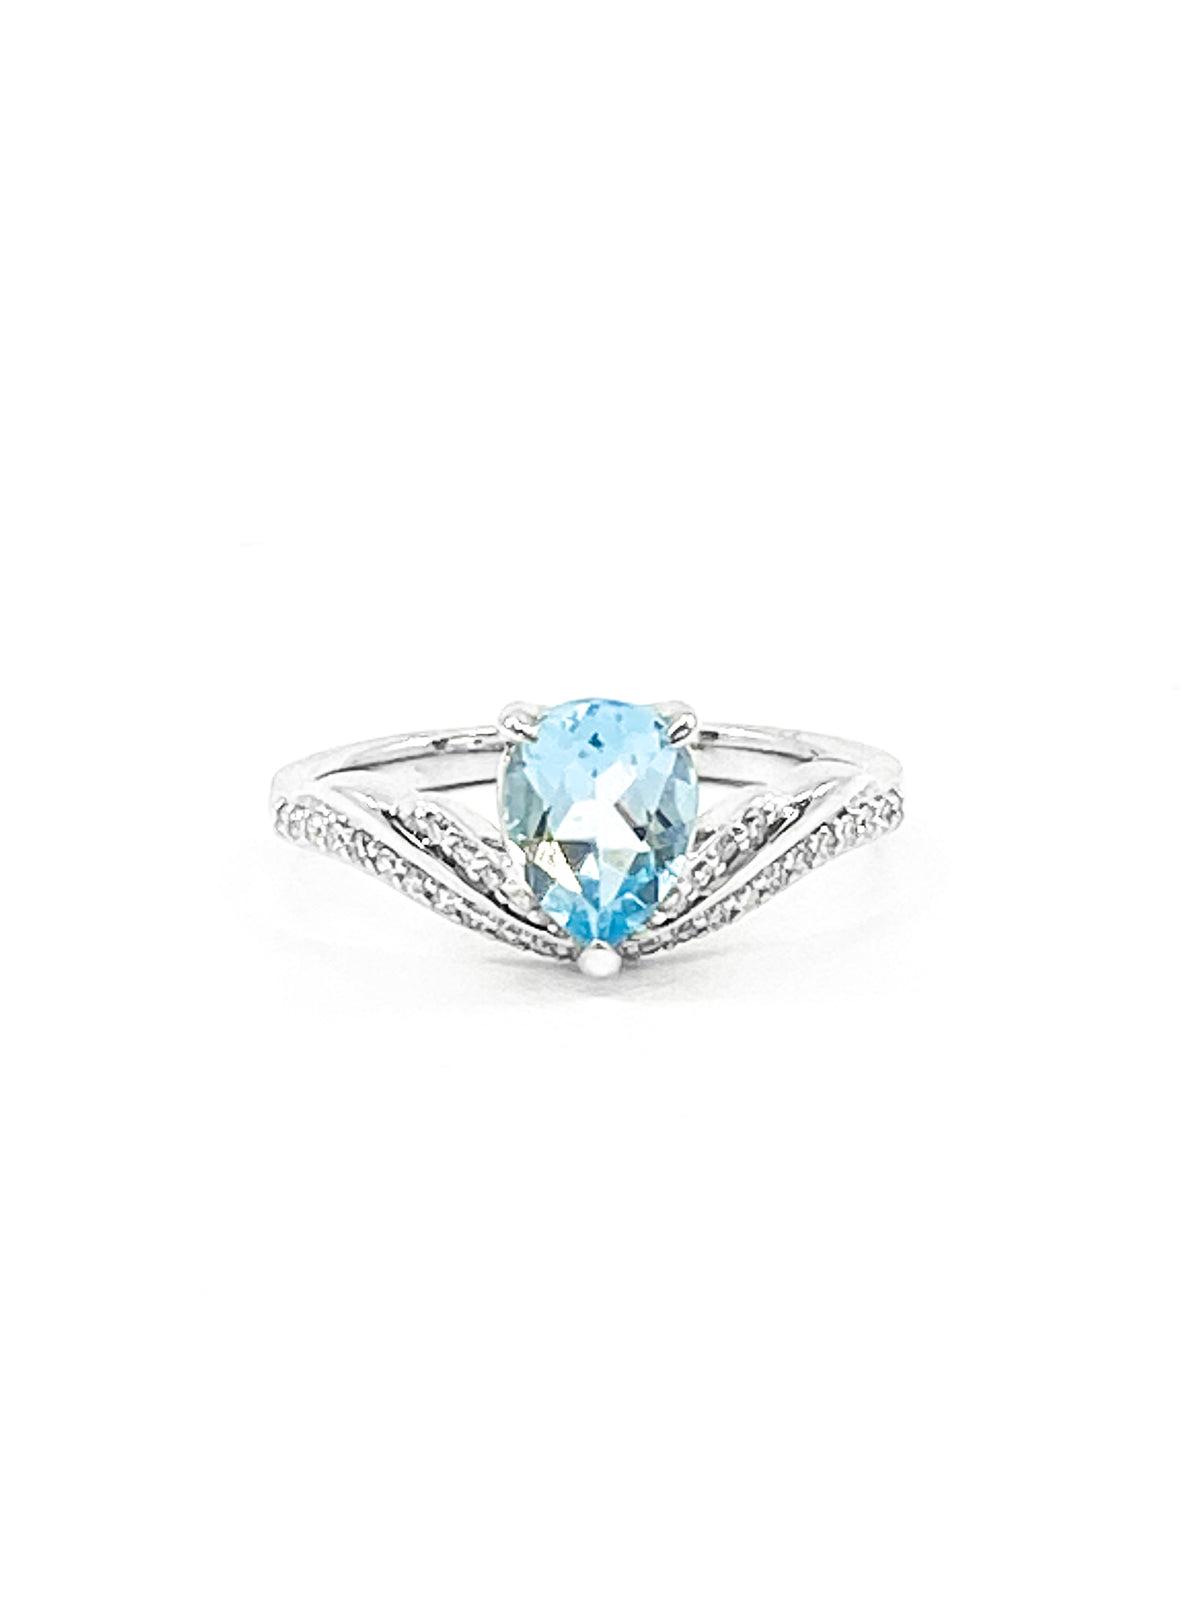 10K White Gold 1.40cttw Genuine Blue Topaz and 0.16cttw Diamond Ring, size 6.5